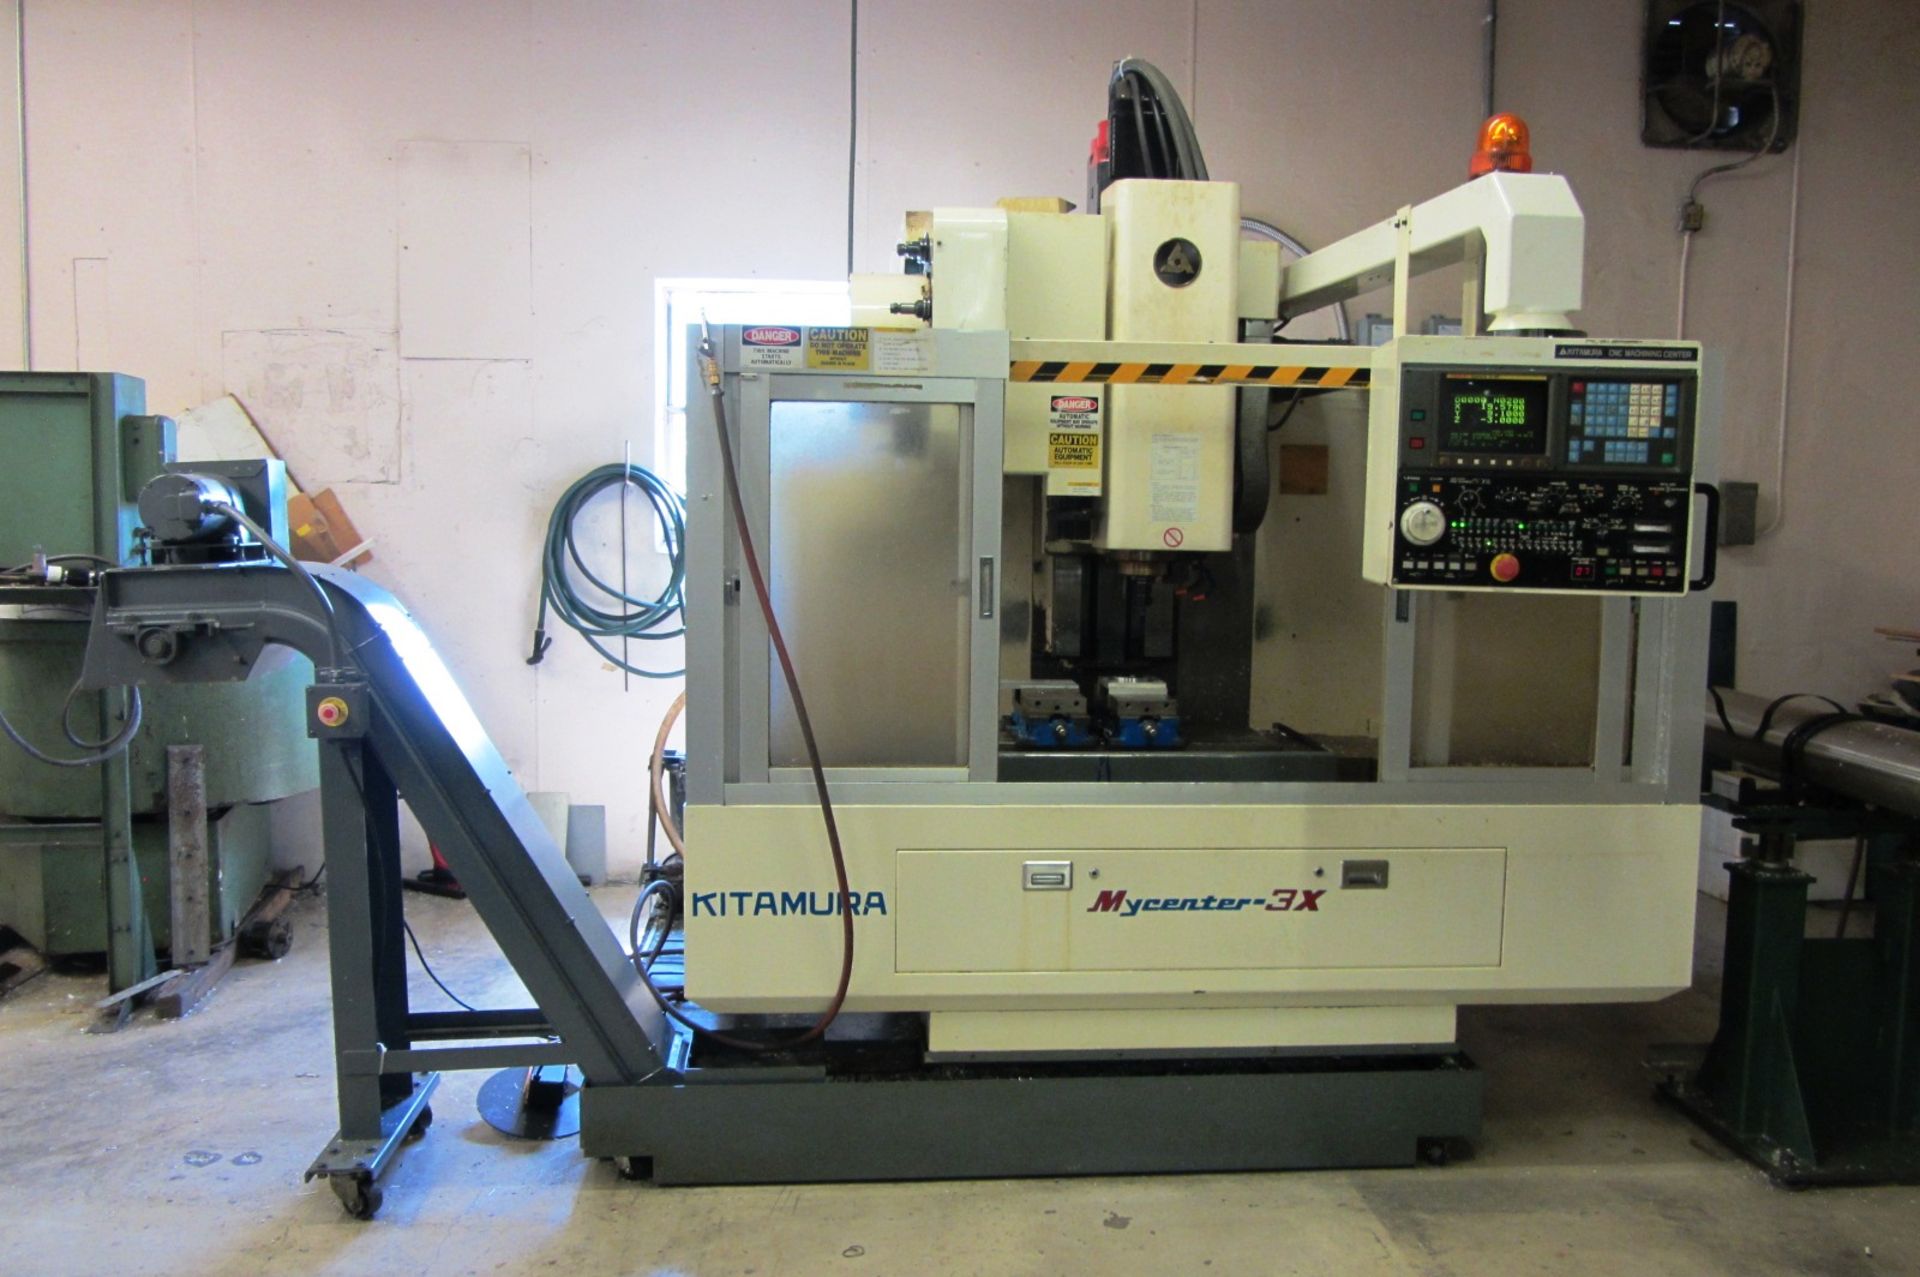 Kitamura MyCenter 3X CNC Vertical Machining Center with (2) 35'' x 16'' Pallet Work Tables, # 40